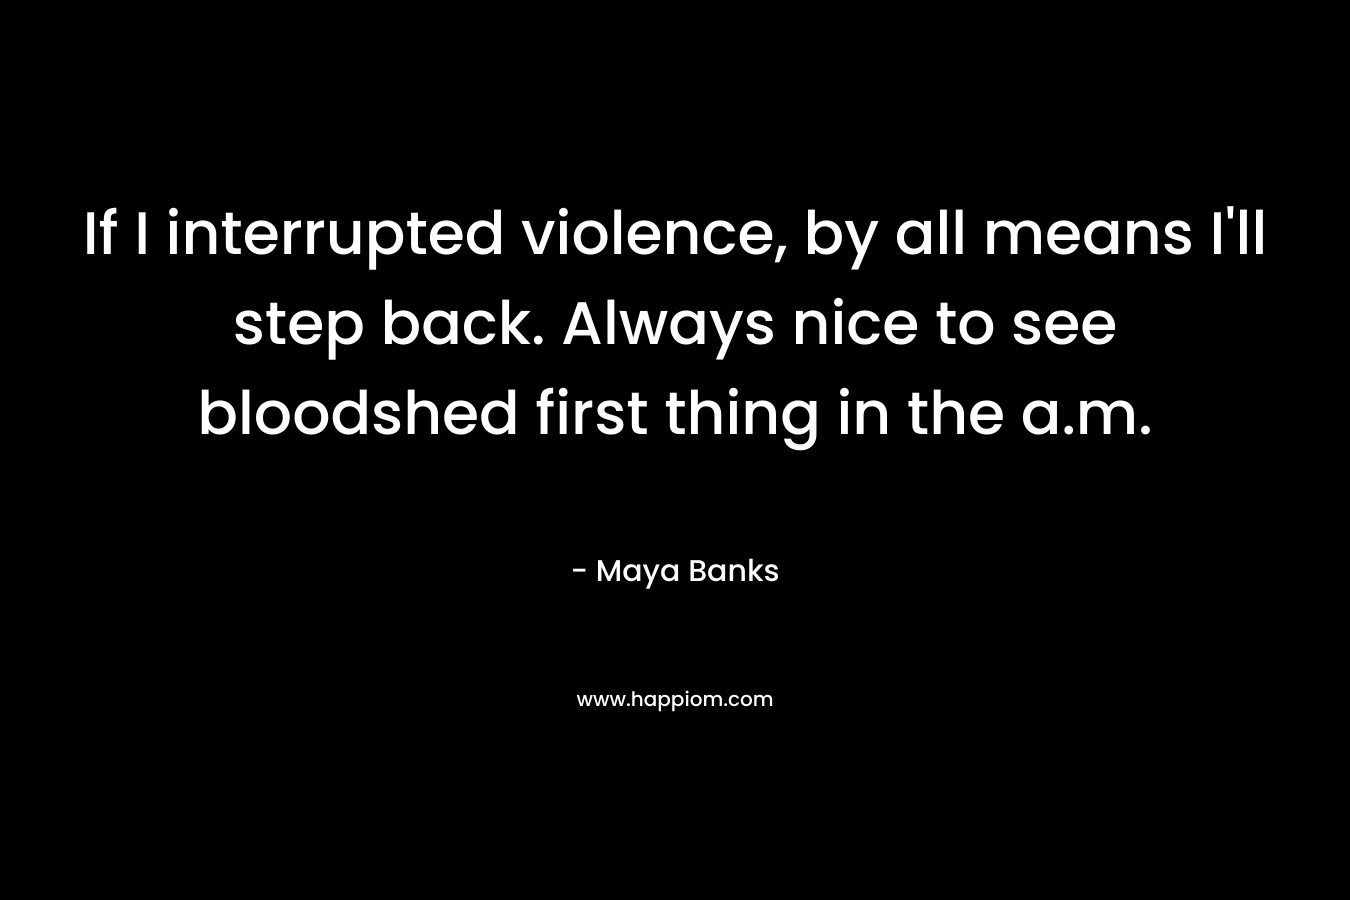 If I interrupted violence, by all means I’ll step back. Always nice to see bloodshed first thing in the a.m. – Maya Banks